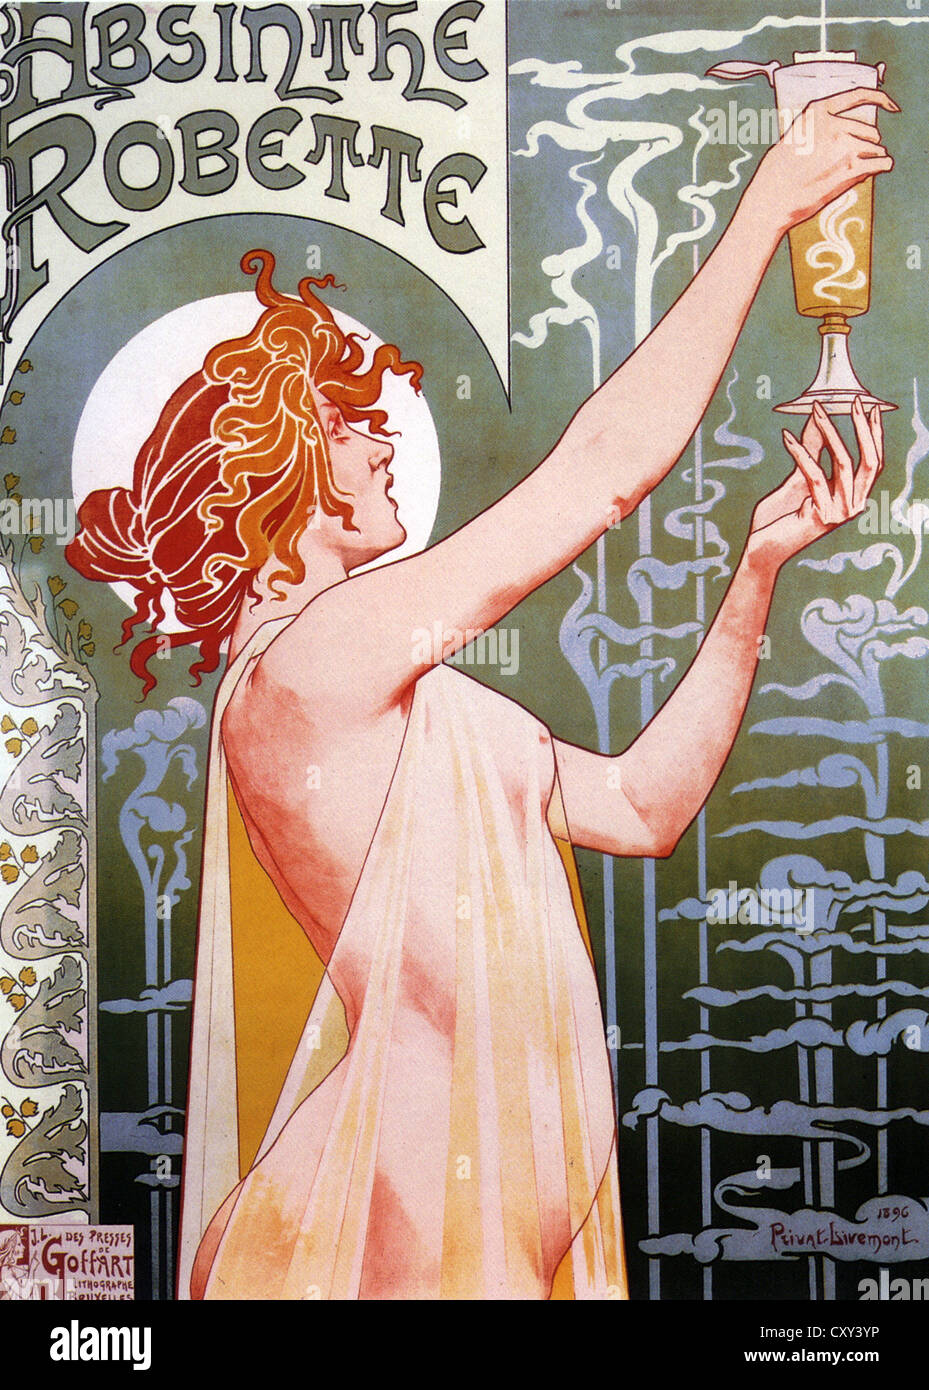 ABSINTHE ROBETTE   1896 poster for French brand of the hallucinogenic drink Stock Photo